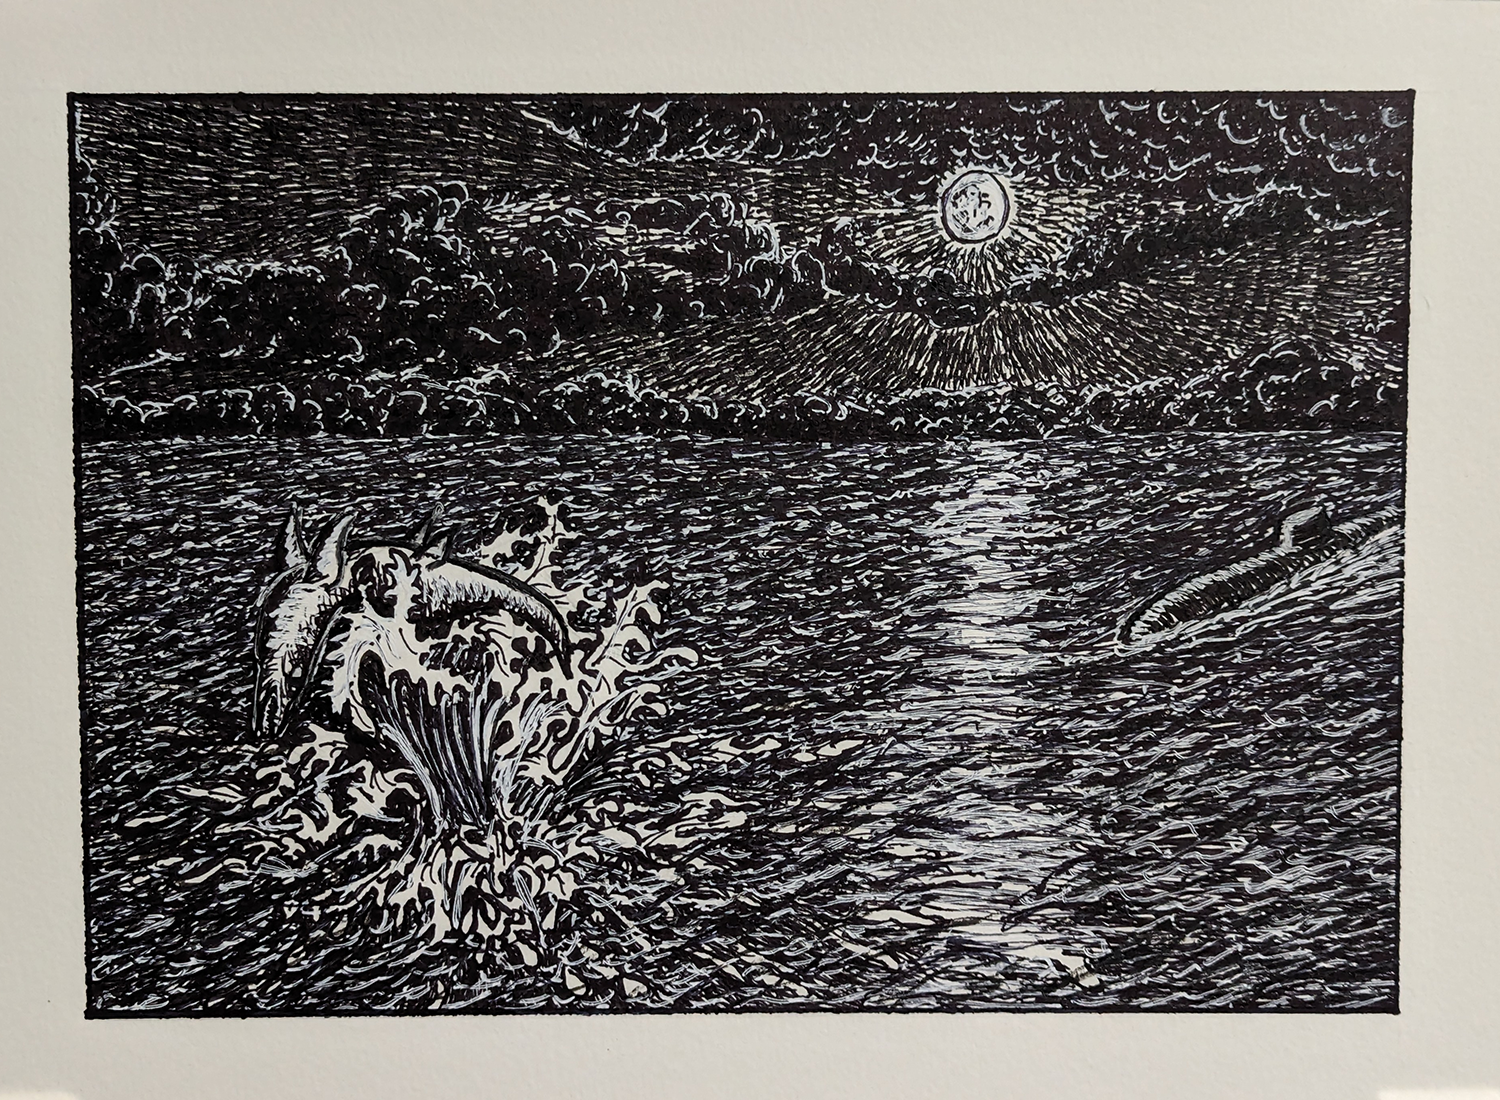 The U28 creature being basted out of the water by an explosion from a ship sank by german Uboat u28 during world war 1 under a moonlit sky pen and ink drawing